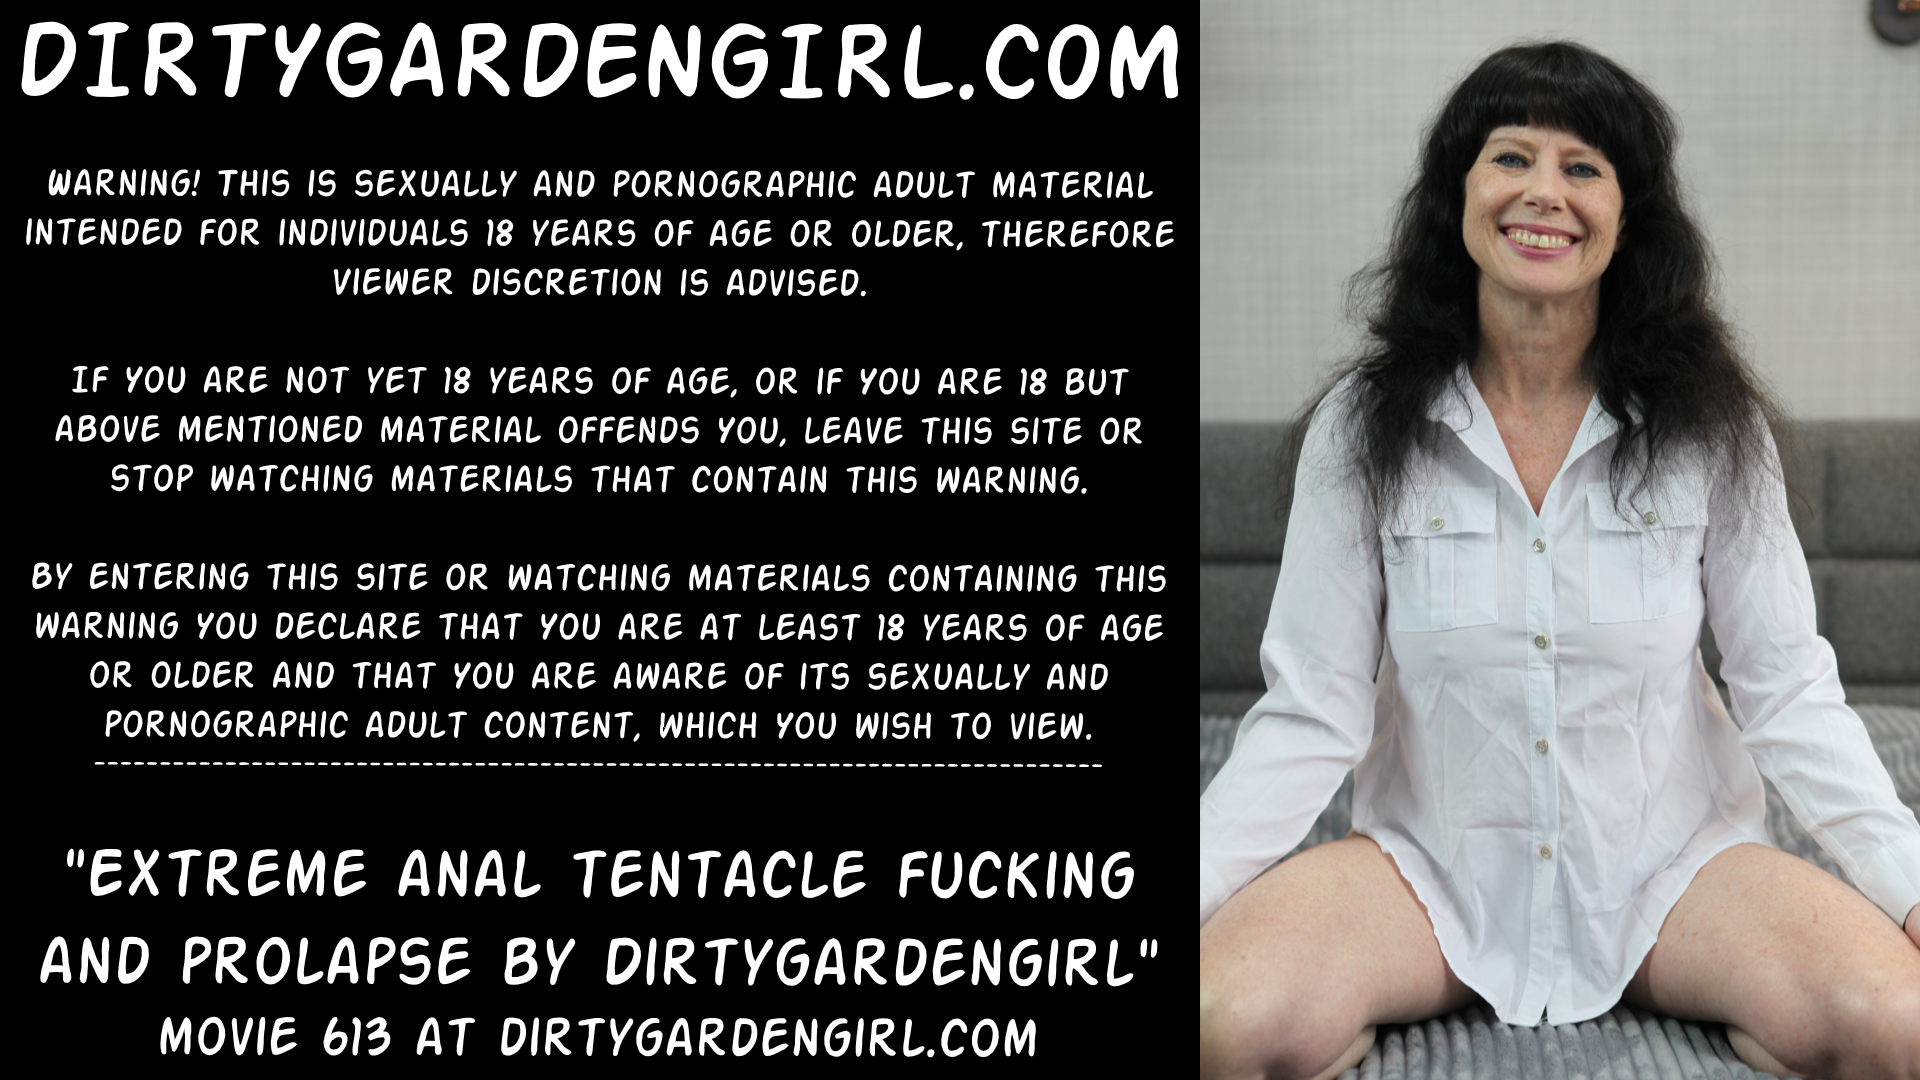 Extreme anal tentacle fucking and prolapse by Dirtygardengirl